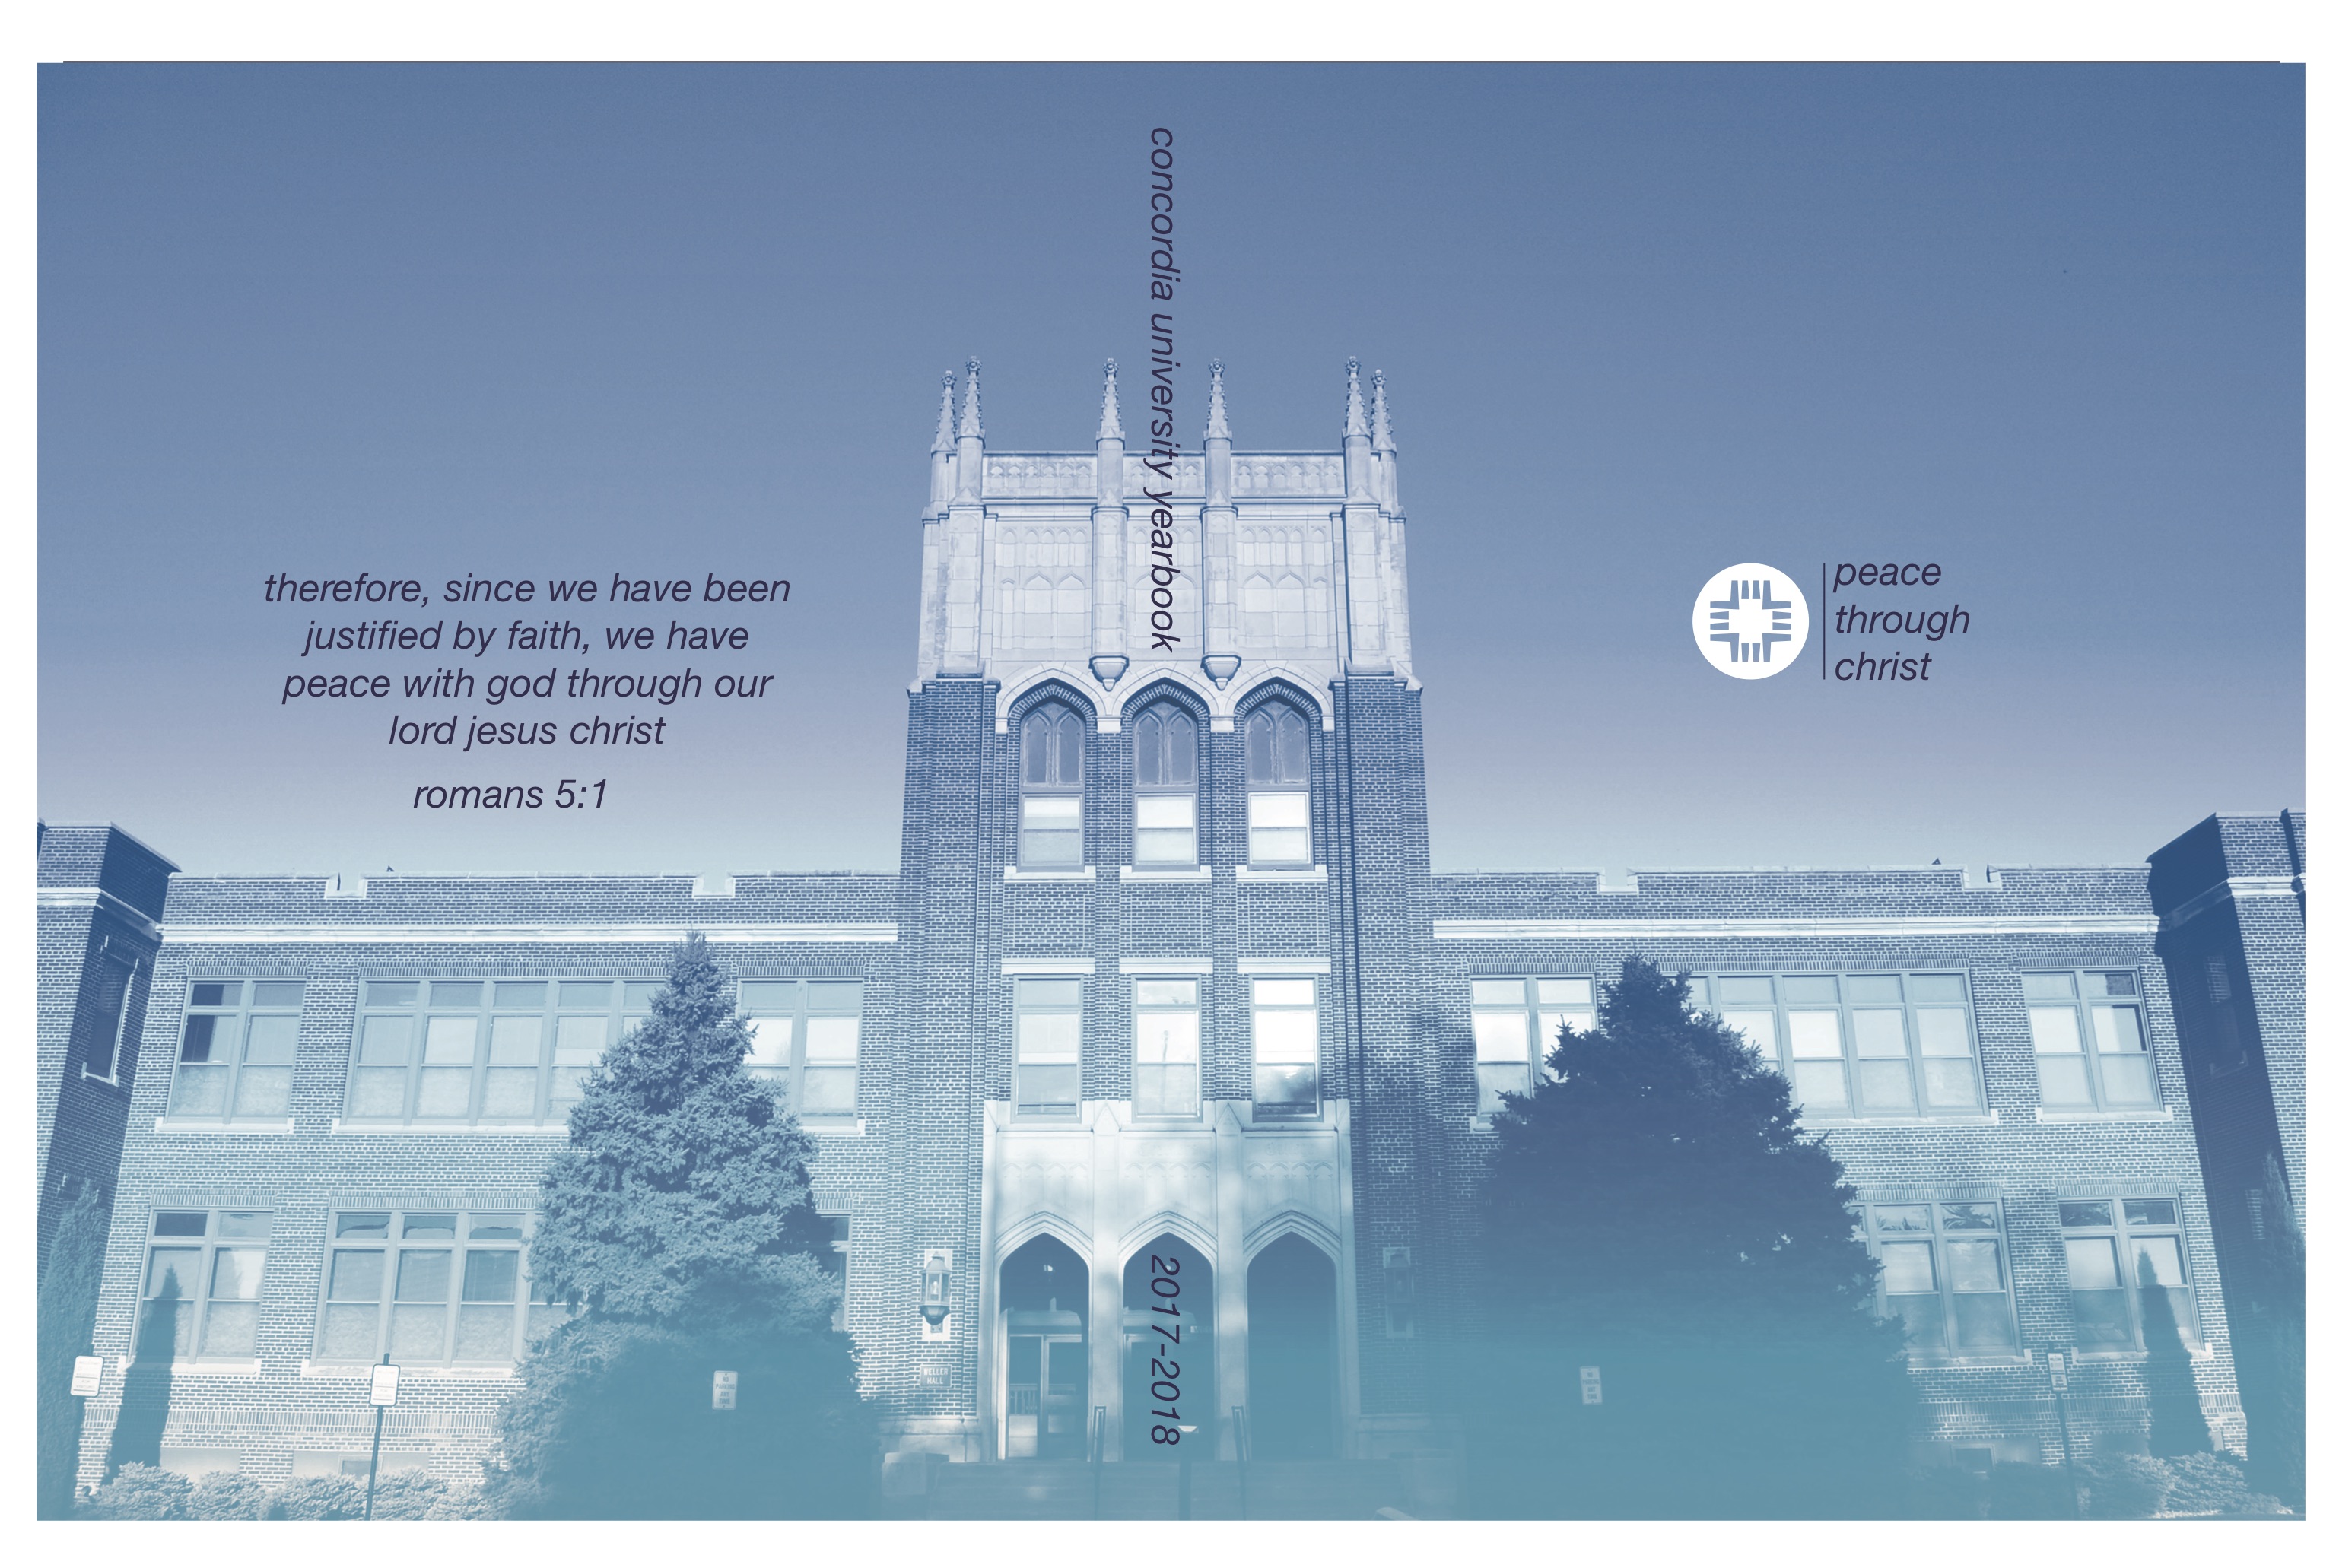 Buy Previous Yearbooks – TOWER YEARBOOK